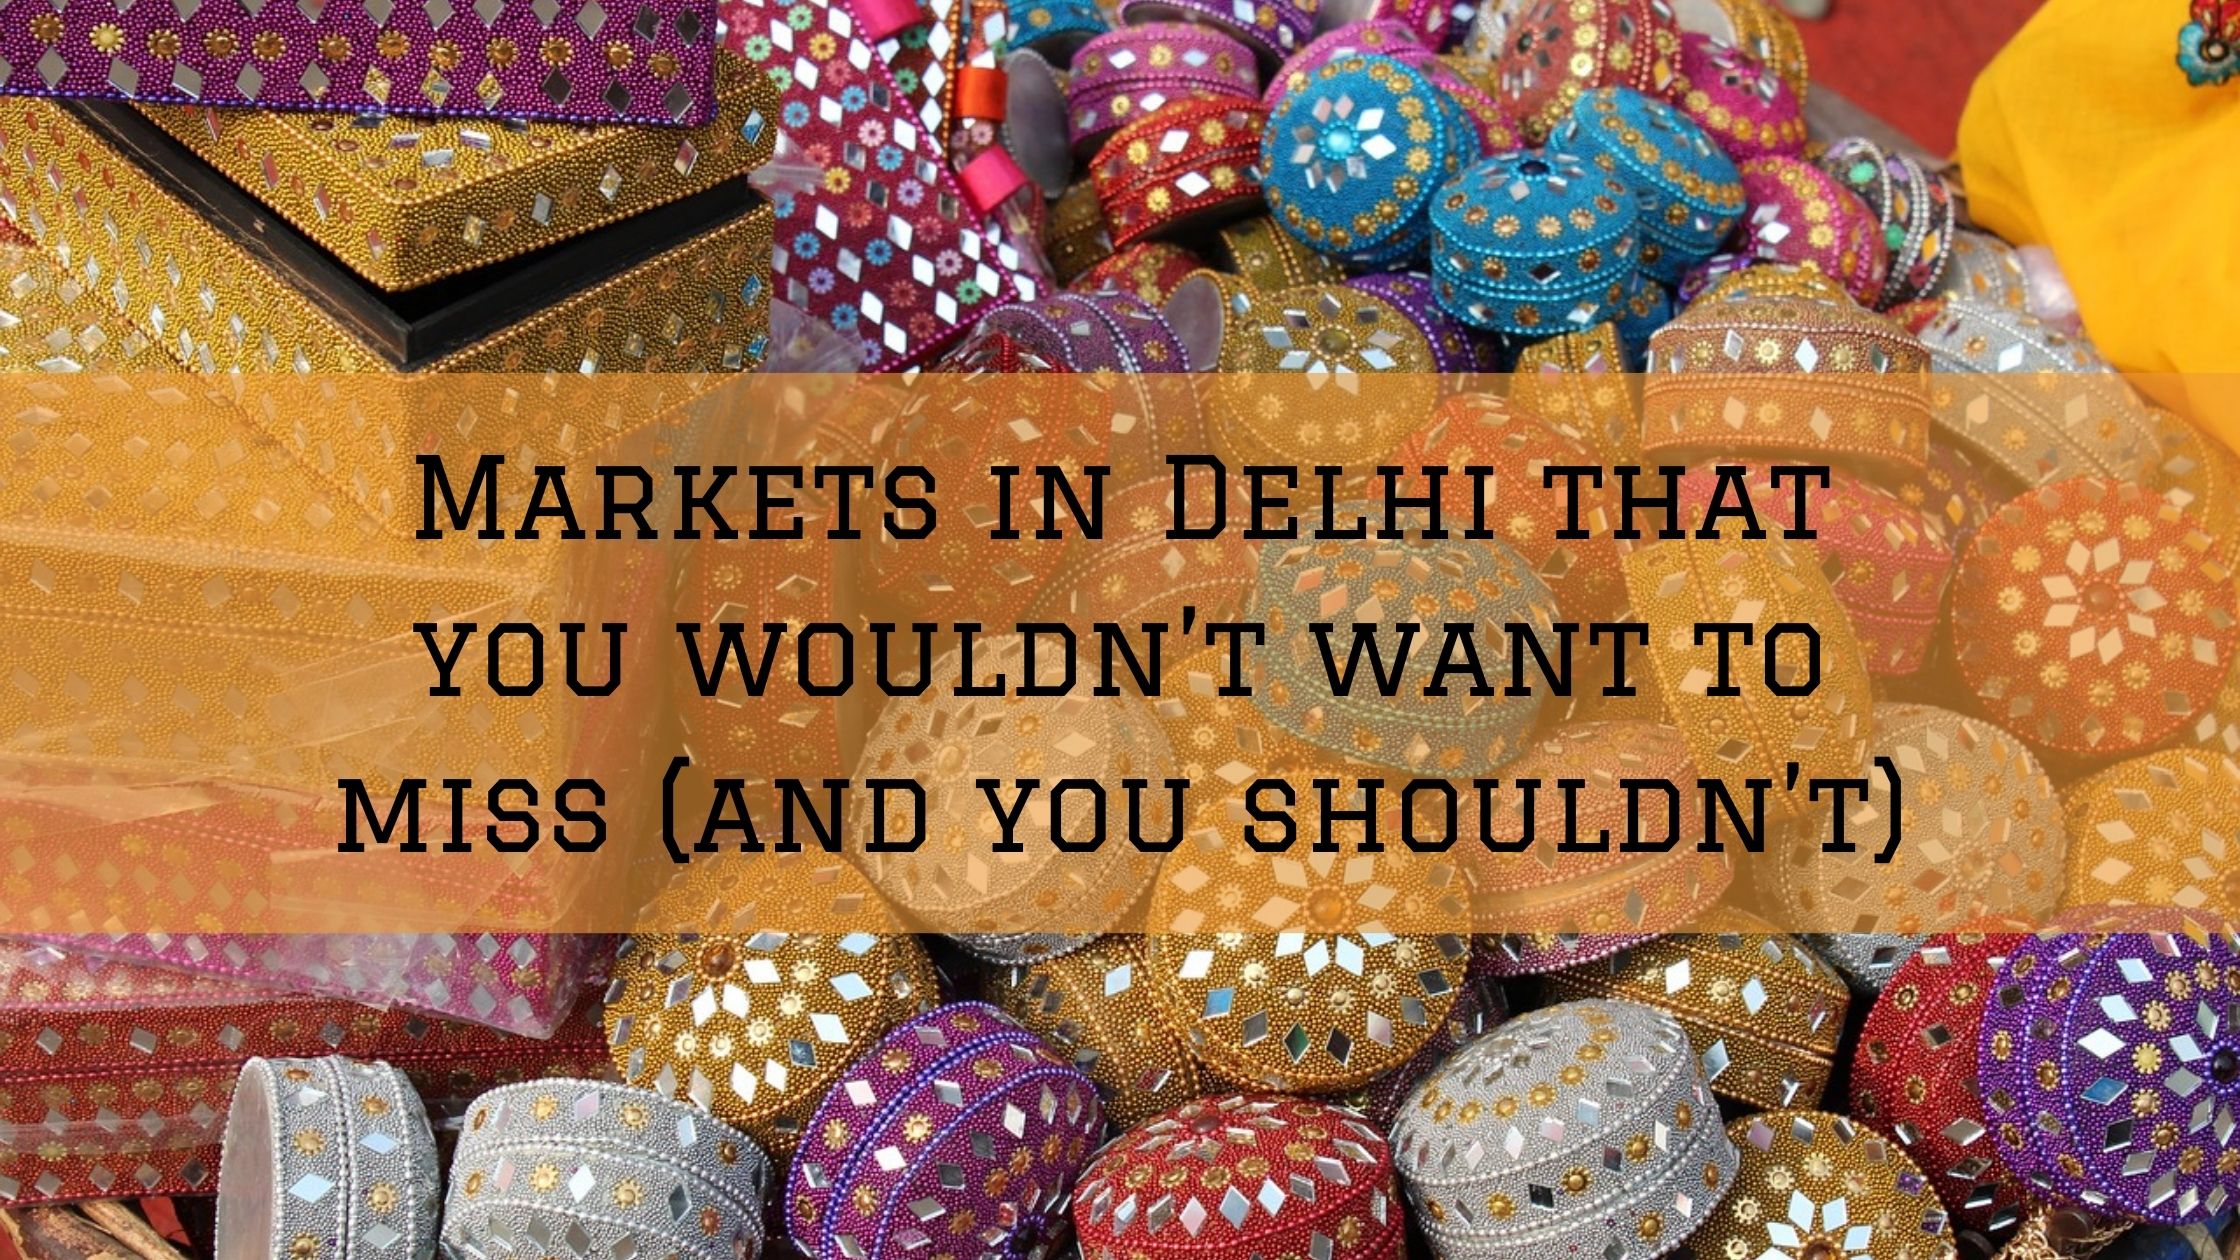 6 Markets in Delhi that you wouldn’t want to miss (and you shouldn’t)